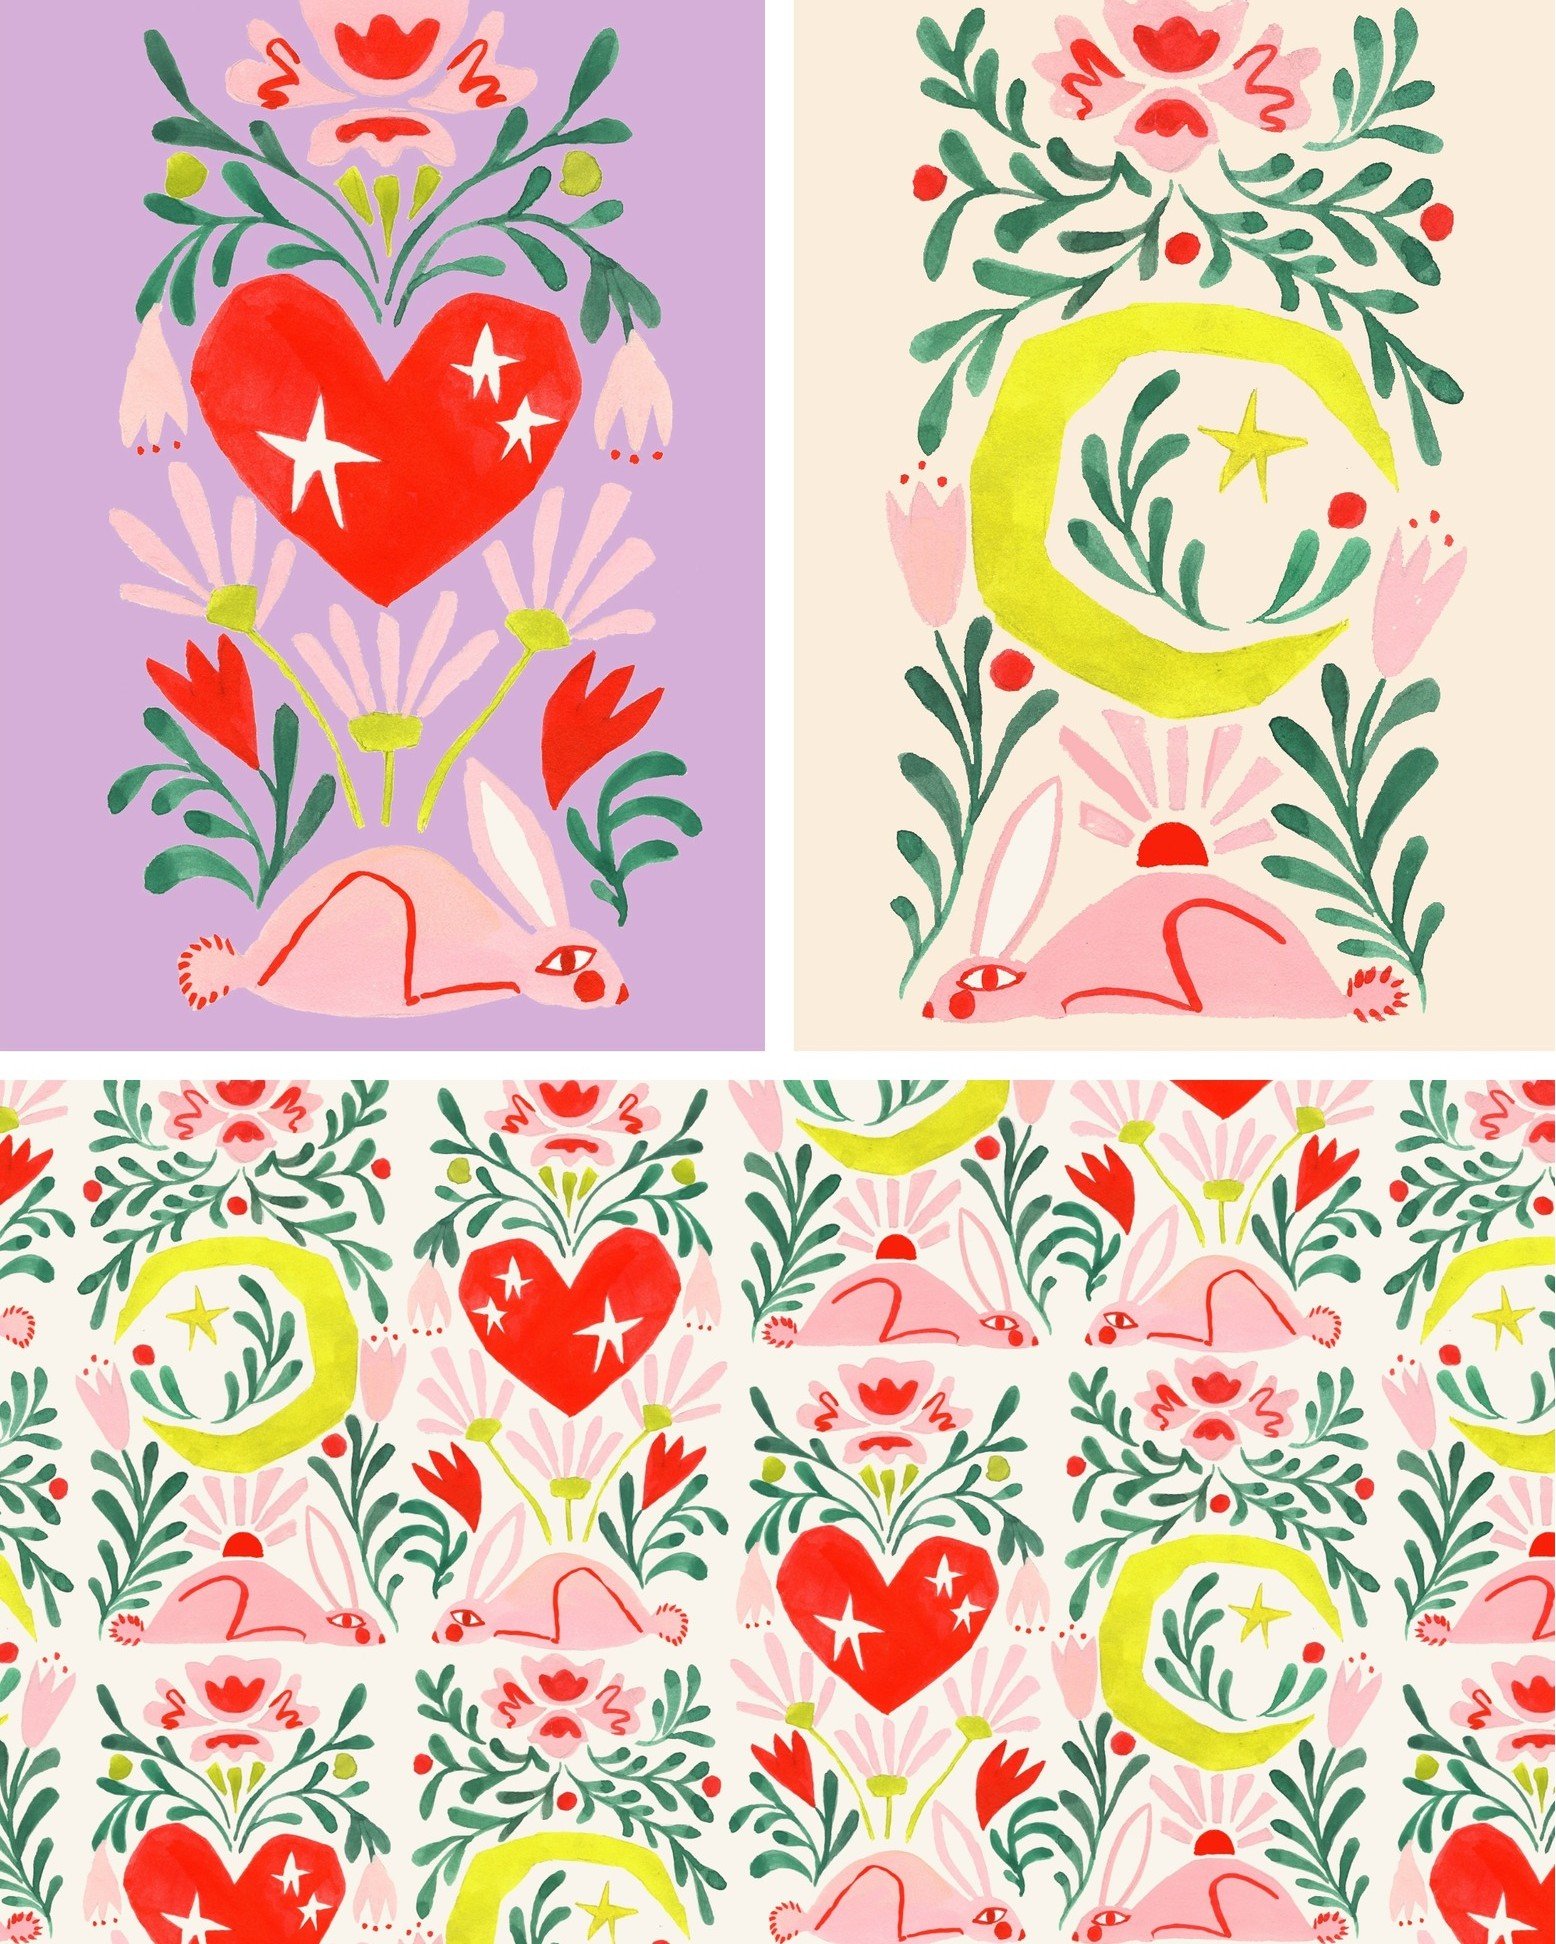 Bunnies and flowers and hearts and moons from @bydylanm 😍 Who else adores this? 

#surfacedesign #artlicensing #tippitytopbestestartever #artagent #jennifernelsonartists #artagency #surfacedesignagency #animalartwork #animalart #stationerydesign #su